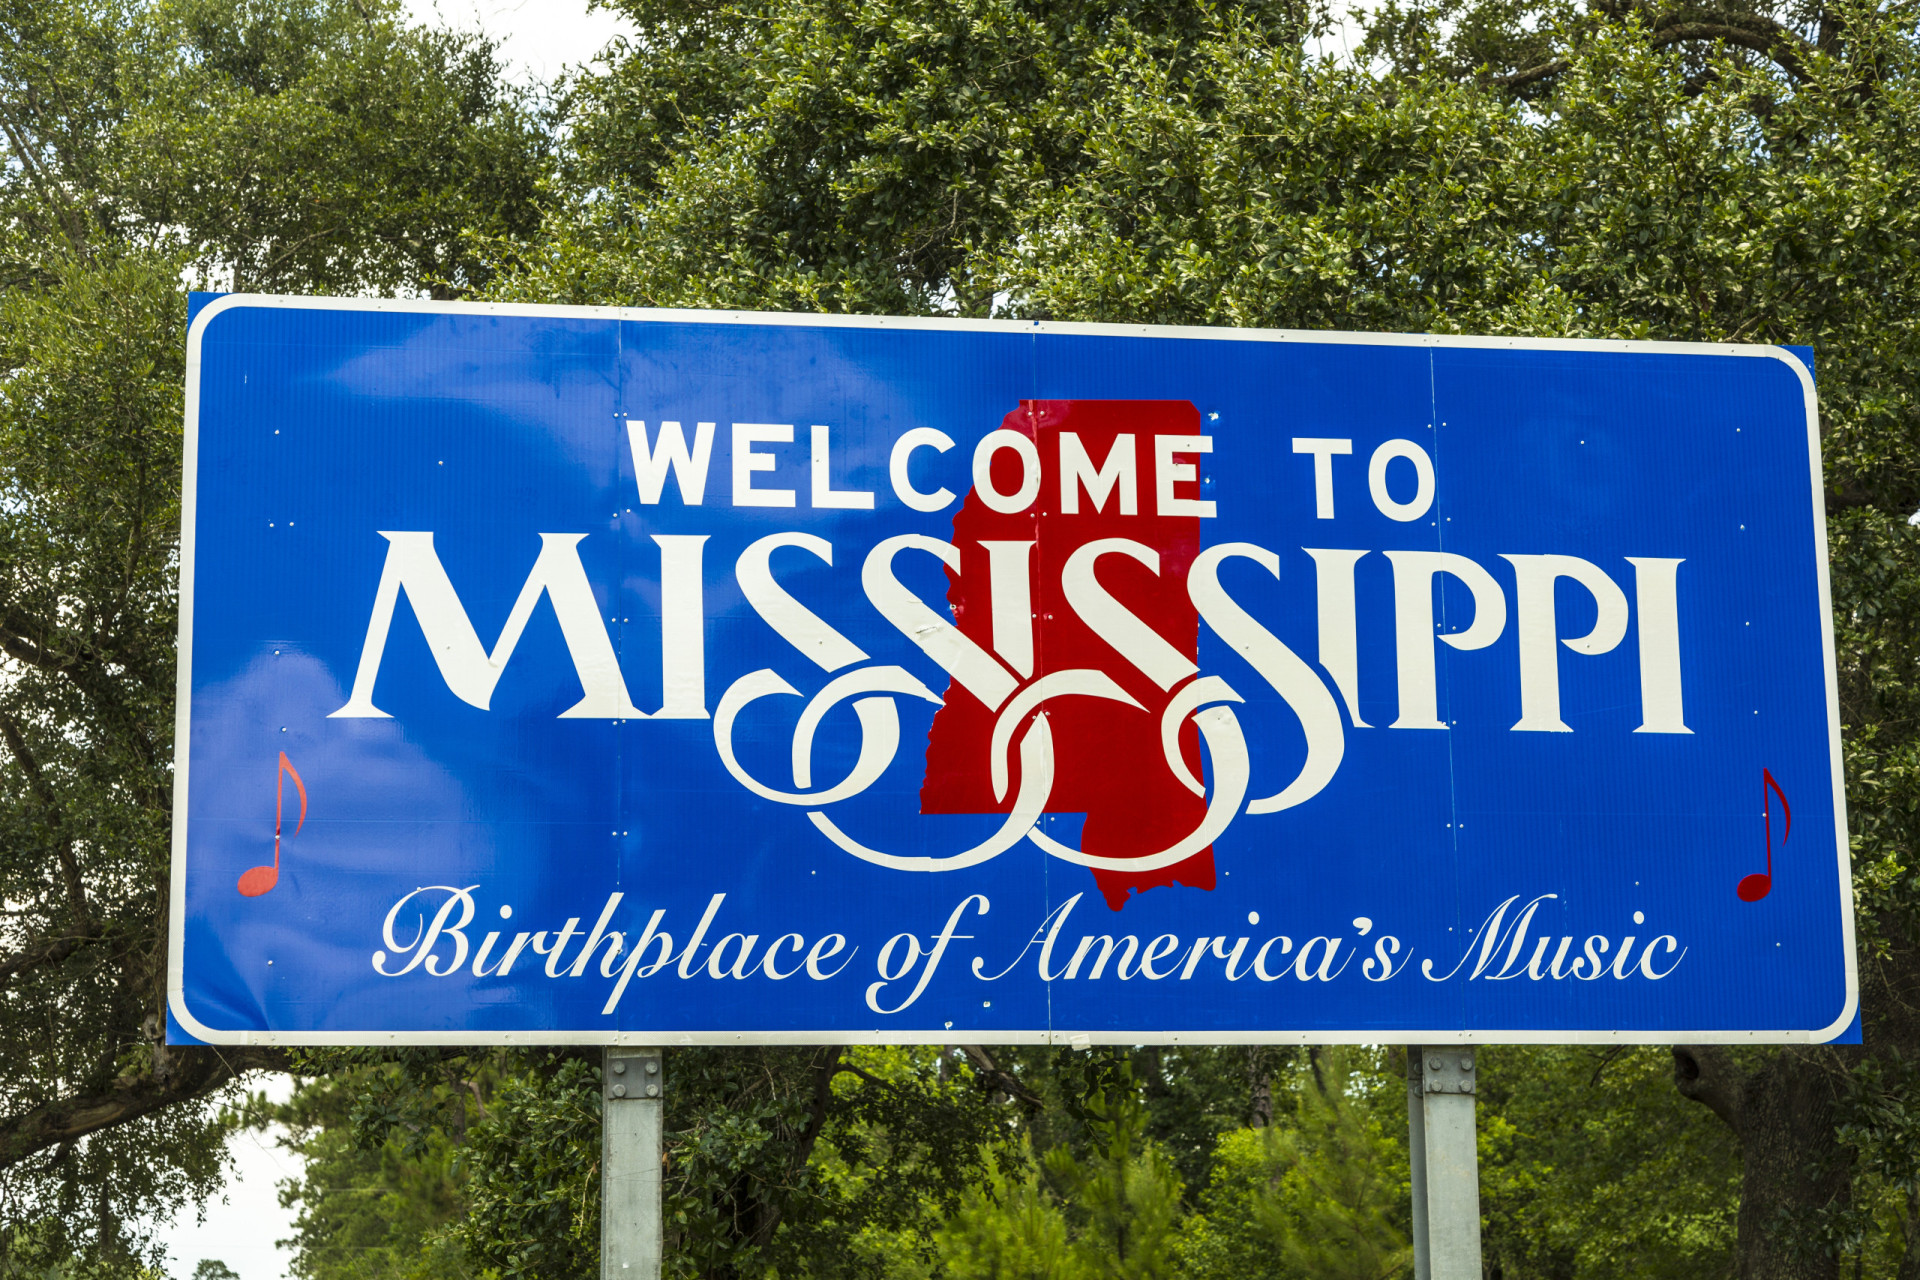 <p>The state welcome sign makes reference to the Mississippi Delta, the birthplace of Blues and therefore the "Birthplace of America's Music."</p><p>You may also like:<a href="https://www.starsinsider.com/n/464771?utm_source=msn.com&utm_medium=display&utm_campaign=referral_description&utm_content=572689en-en"> Actors who didn't live to see their final films</a></p>